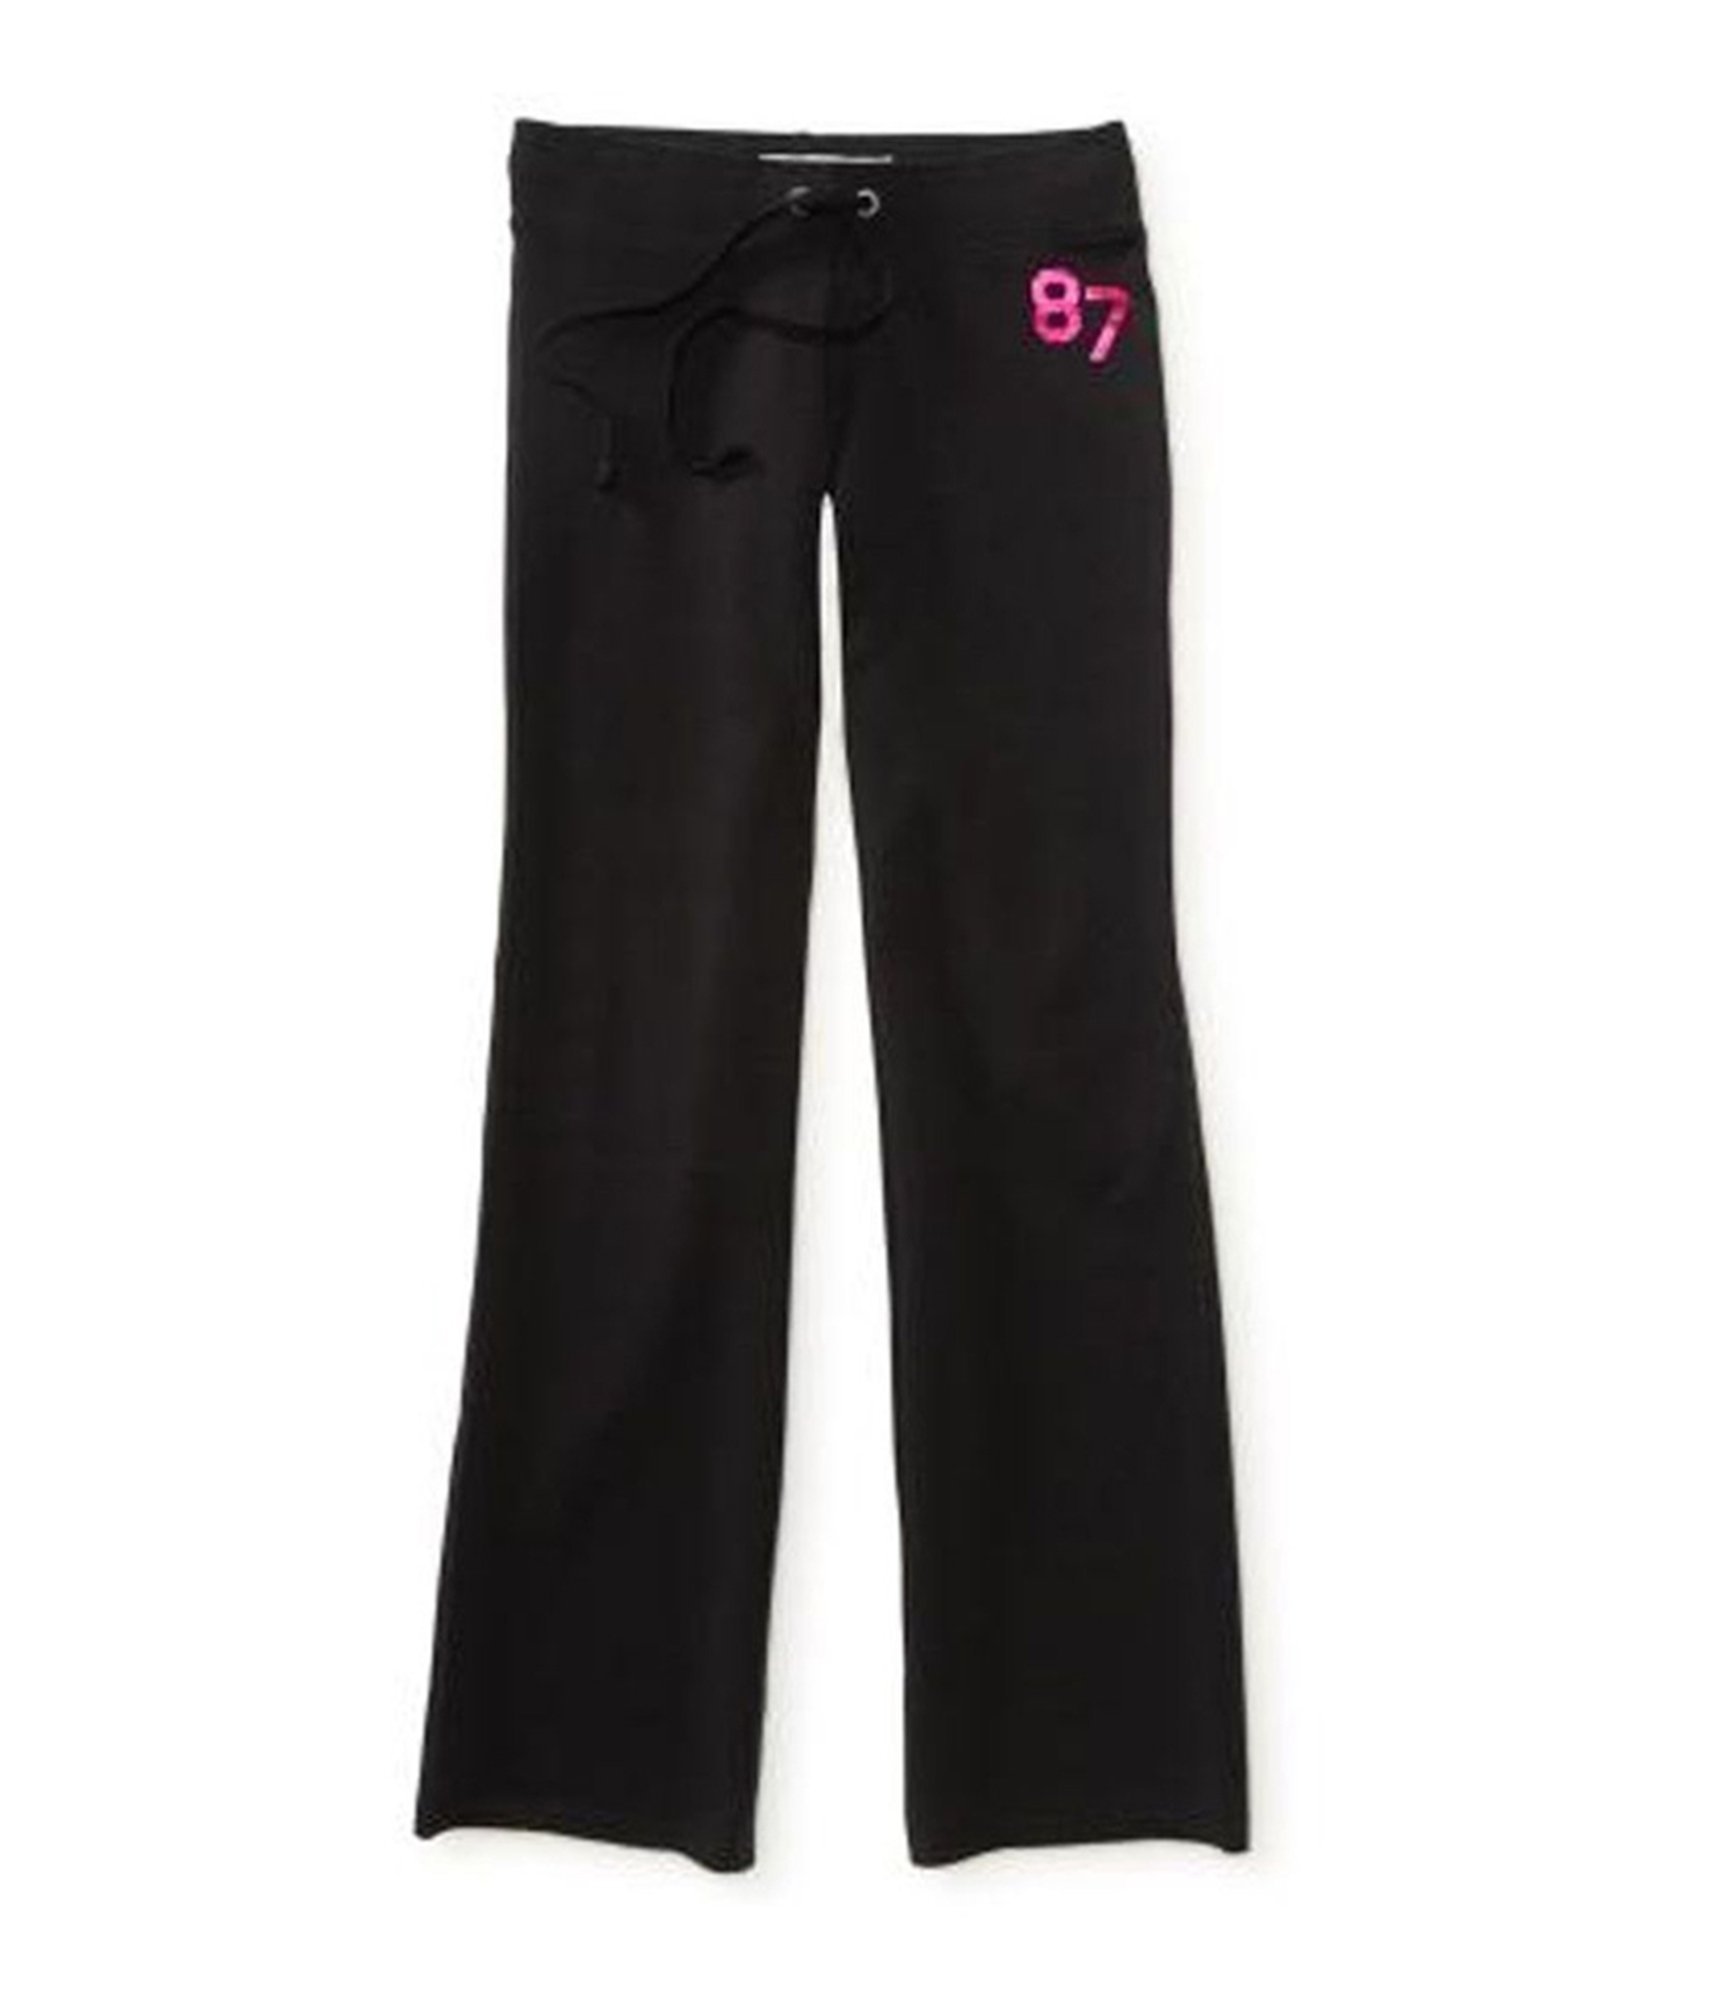 Buy a Aeropostale Womens Fit & Flare Casual Sweatpants, TW1